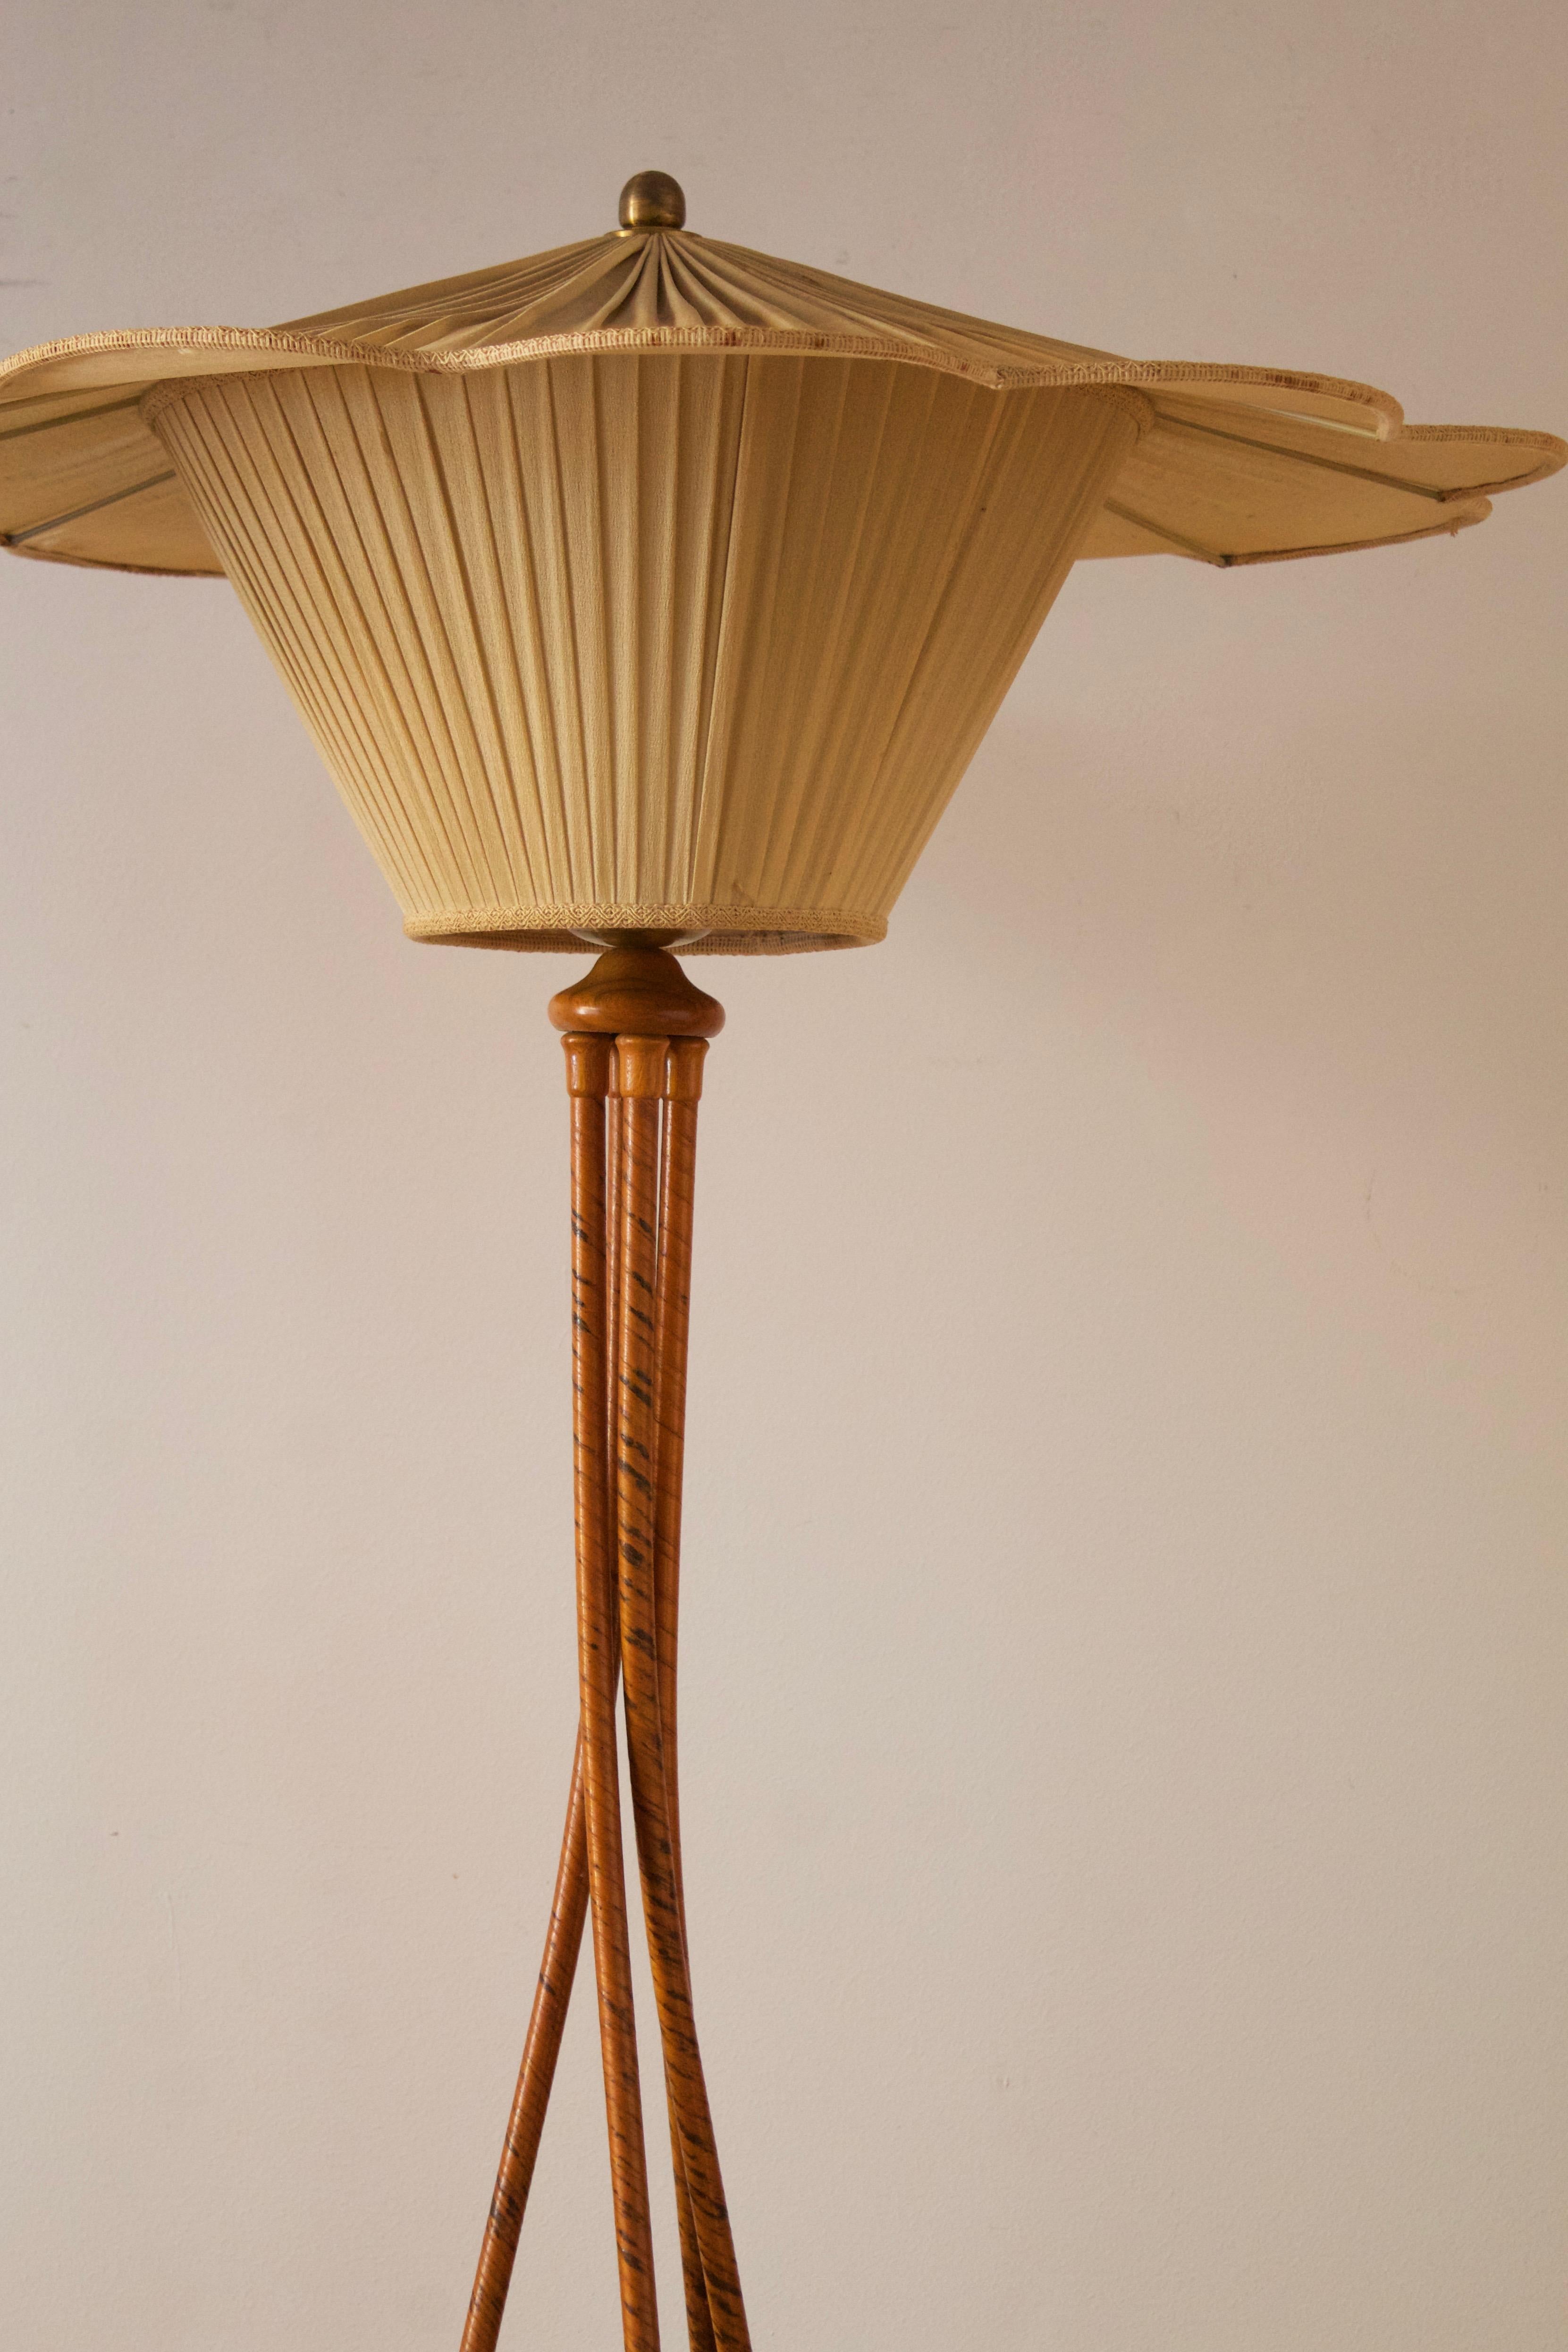 An organic floor lamp. Designed by an unknown Swedish modernist designer, 1930s. Produced in wood and brass. 

Other designers working in the organic style include Jean Royère, Gio Ponti, Vladimir Kagan, Ico Parisi, and George Nakashima.